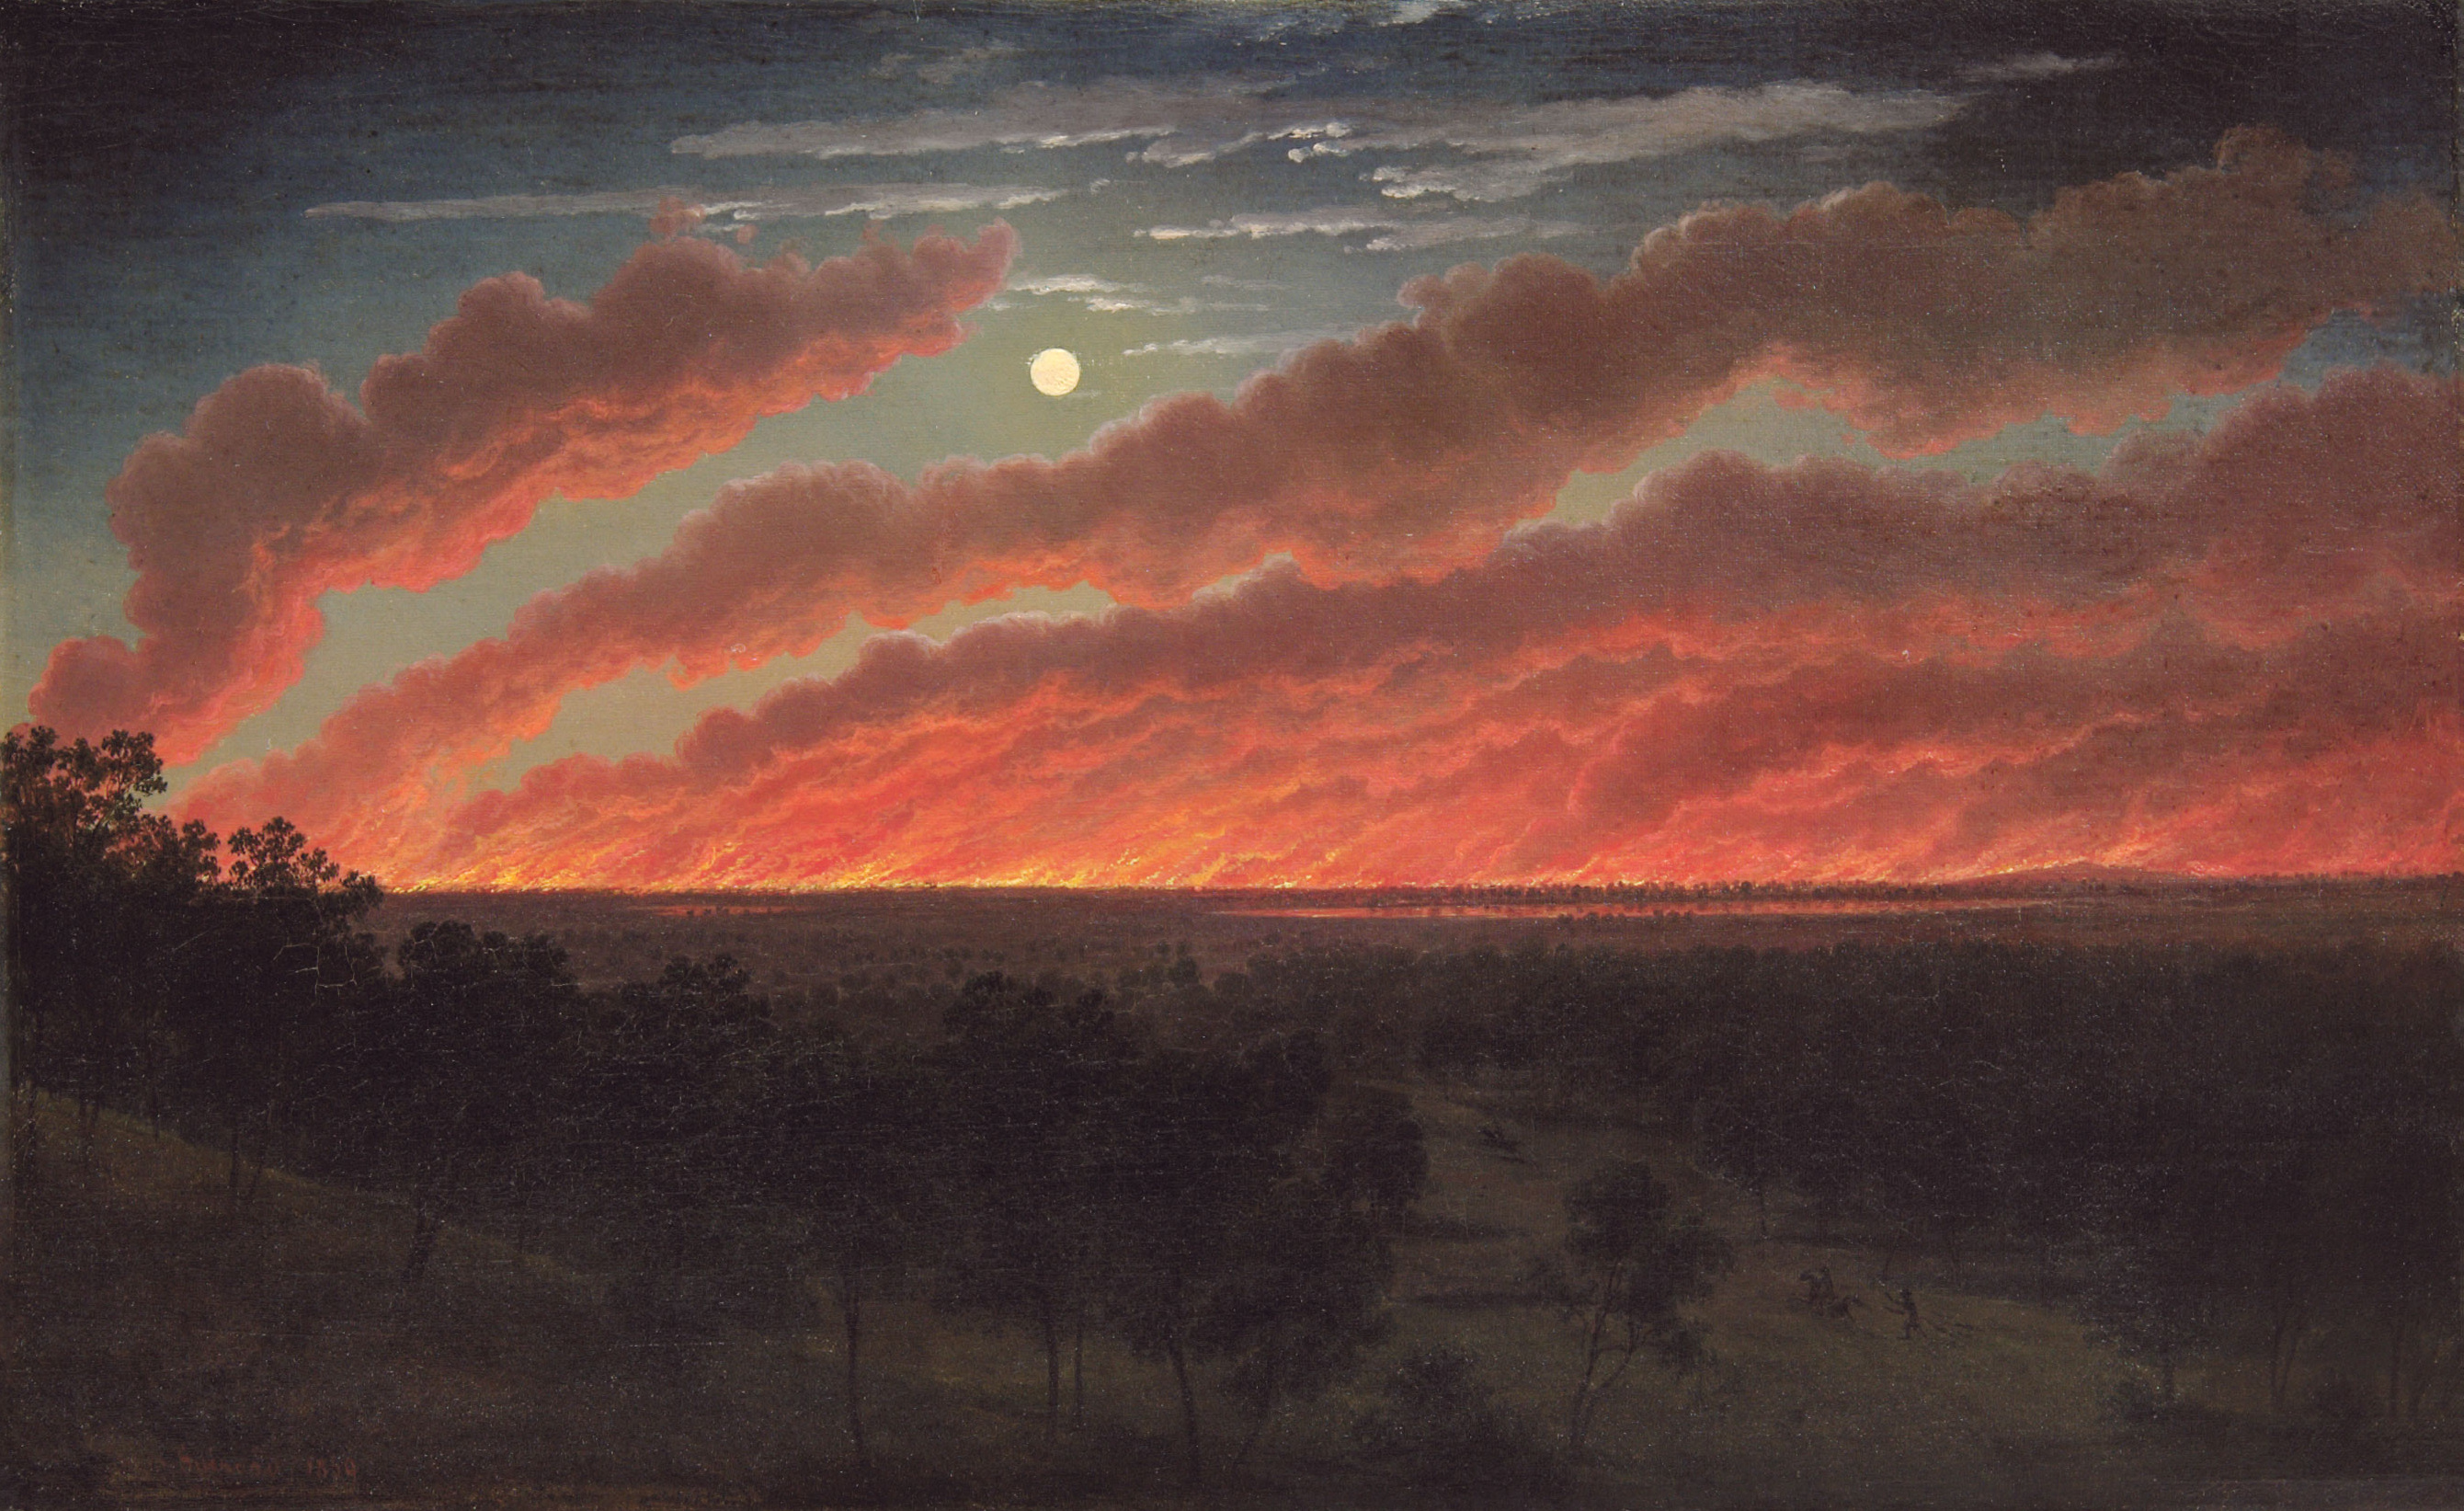 painting of a bush fire from afar, its light reflecting on a cloudy sky